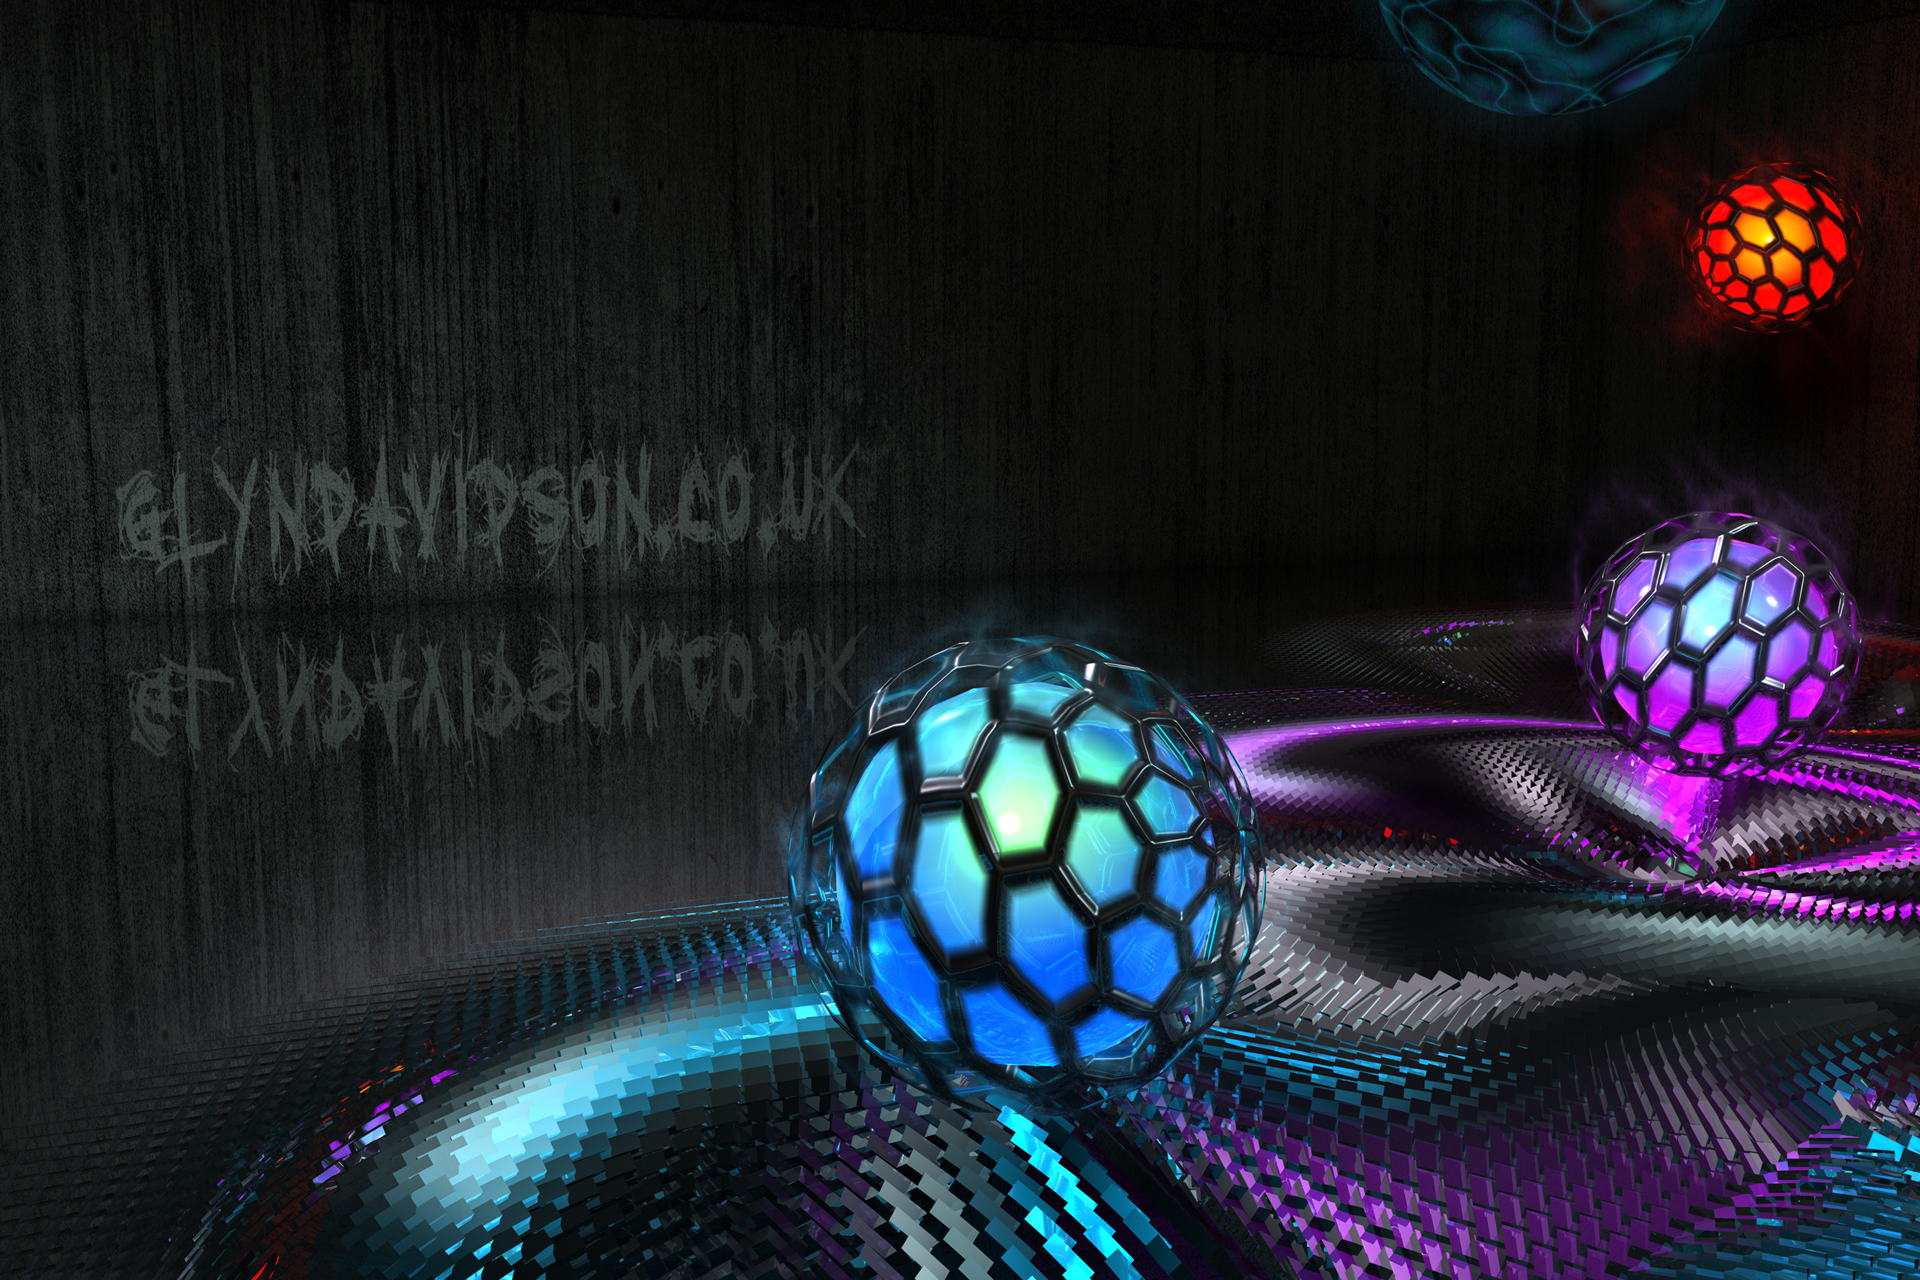 Cinema 4D Mograph wallpaper by TheRealGlyph on DeviantArt